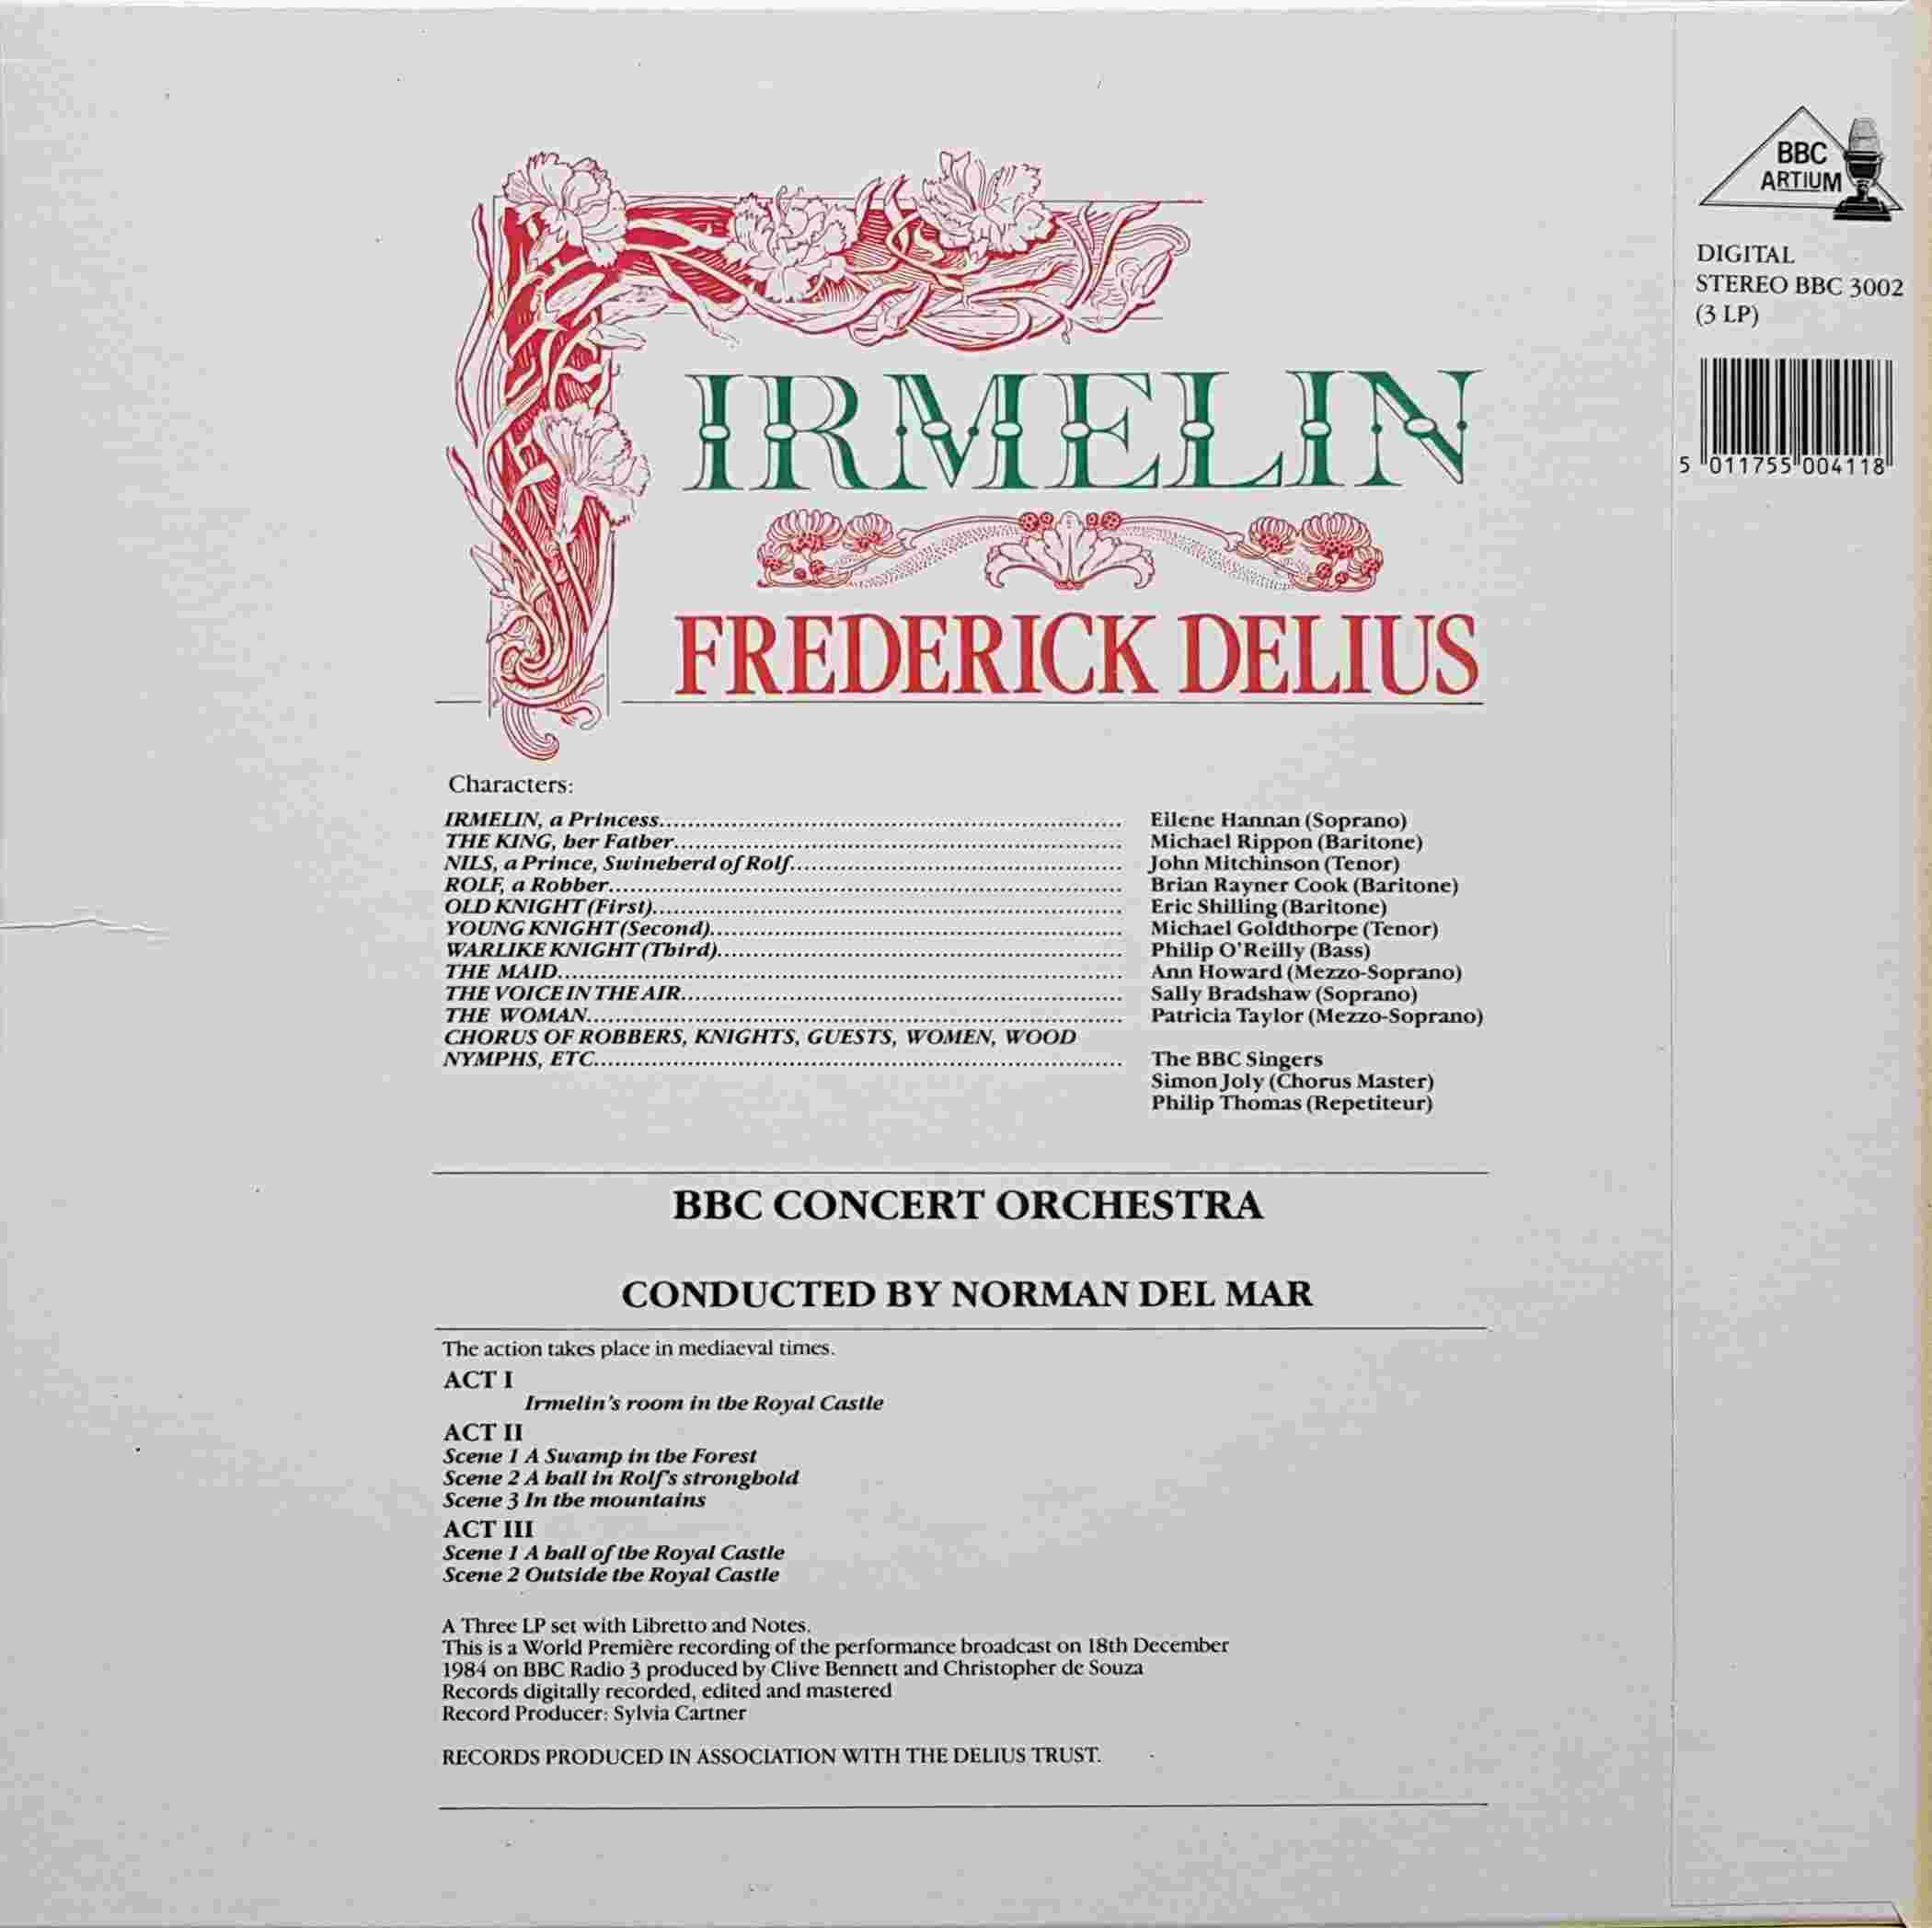 Picture of BBC 3002 Irmelin by artist Frederick Delius from the BBC records and Tapes library